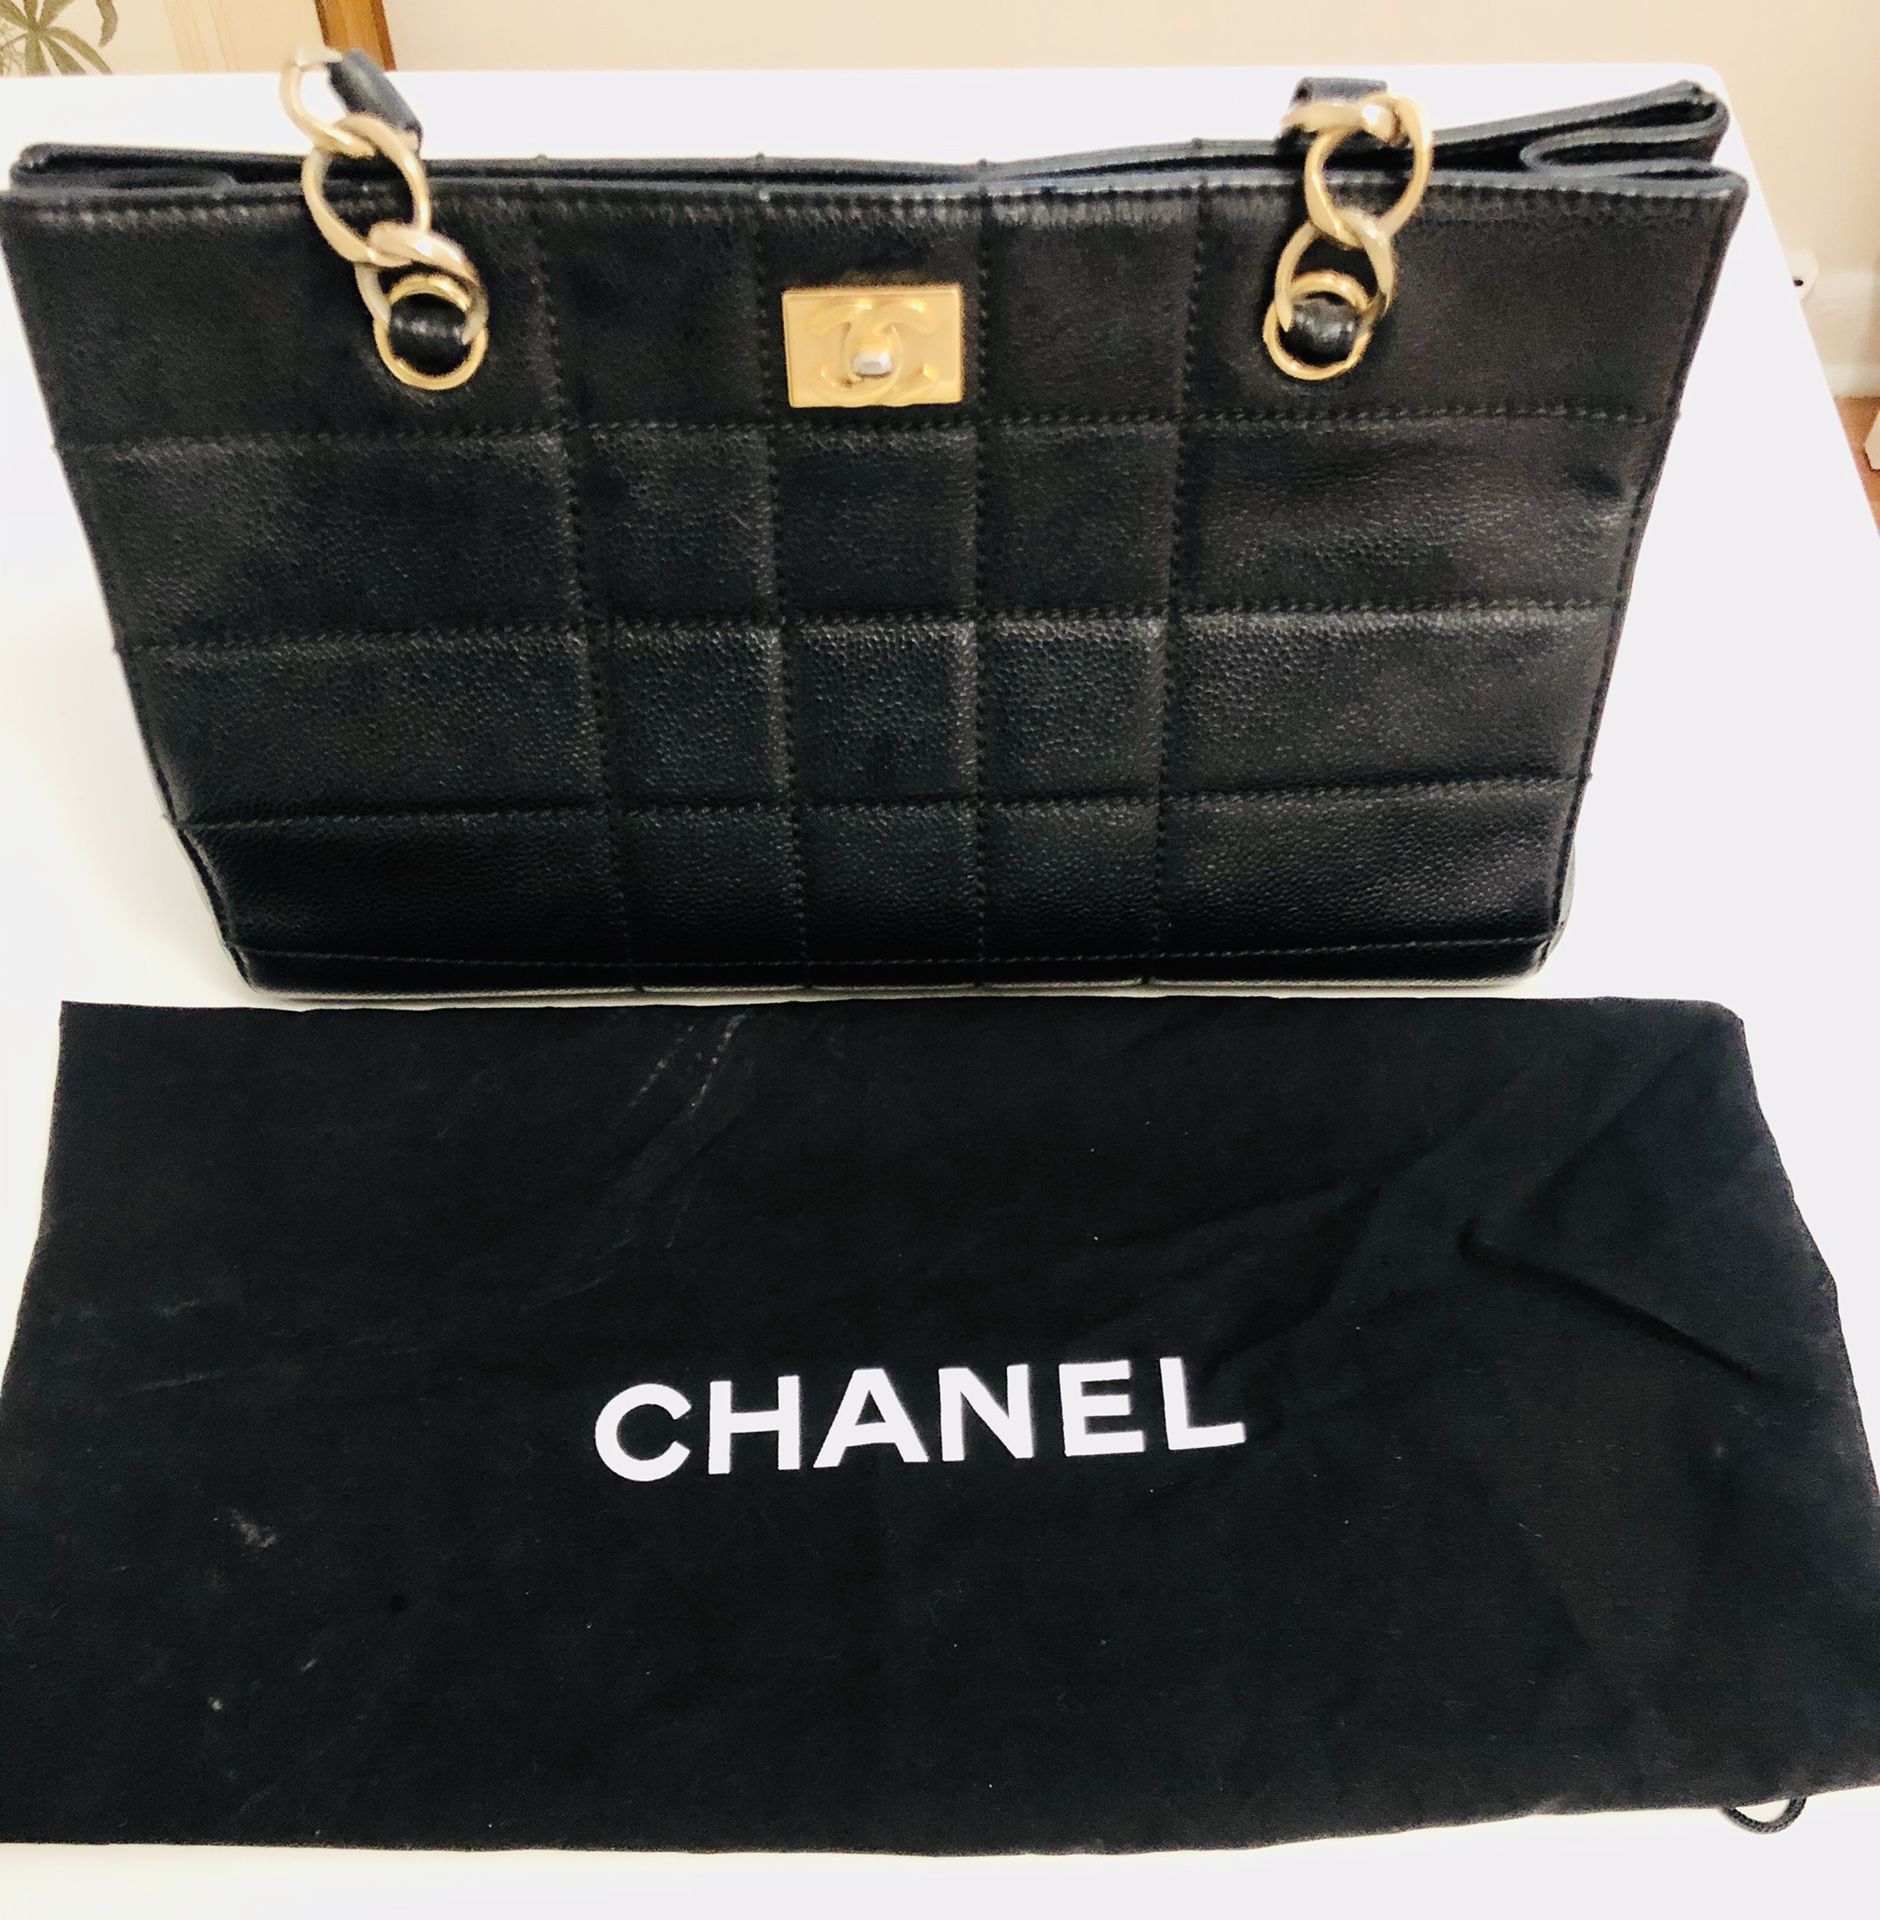 Vintage Chanel chocolate bar grand shopping tote